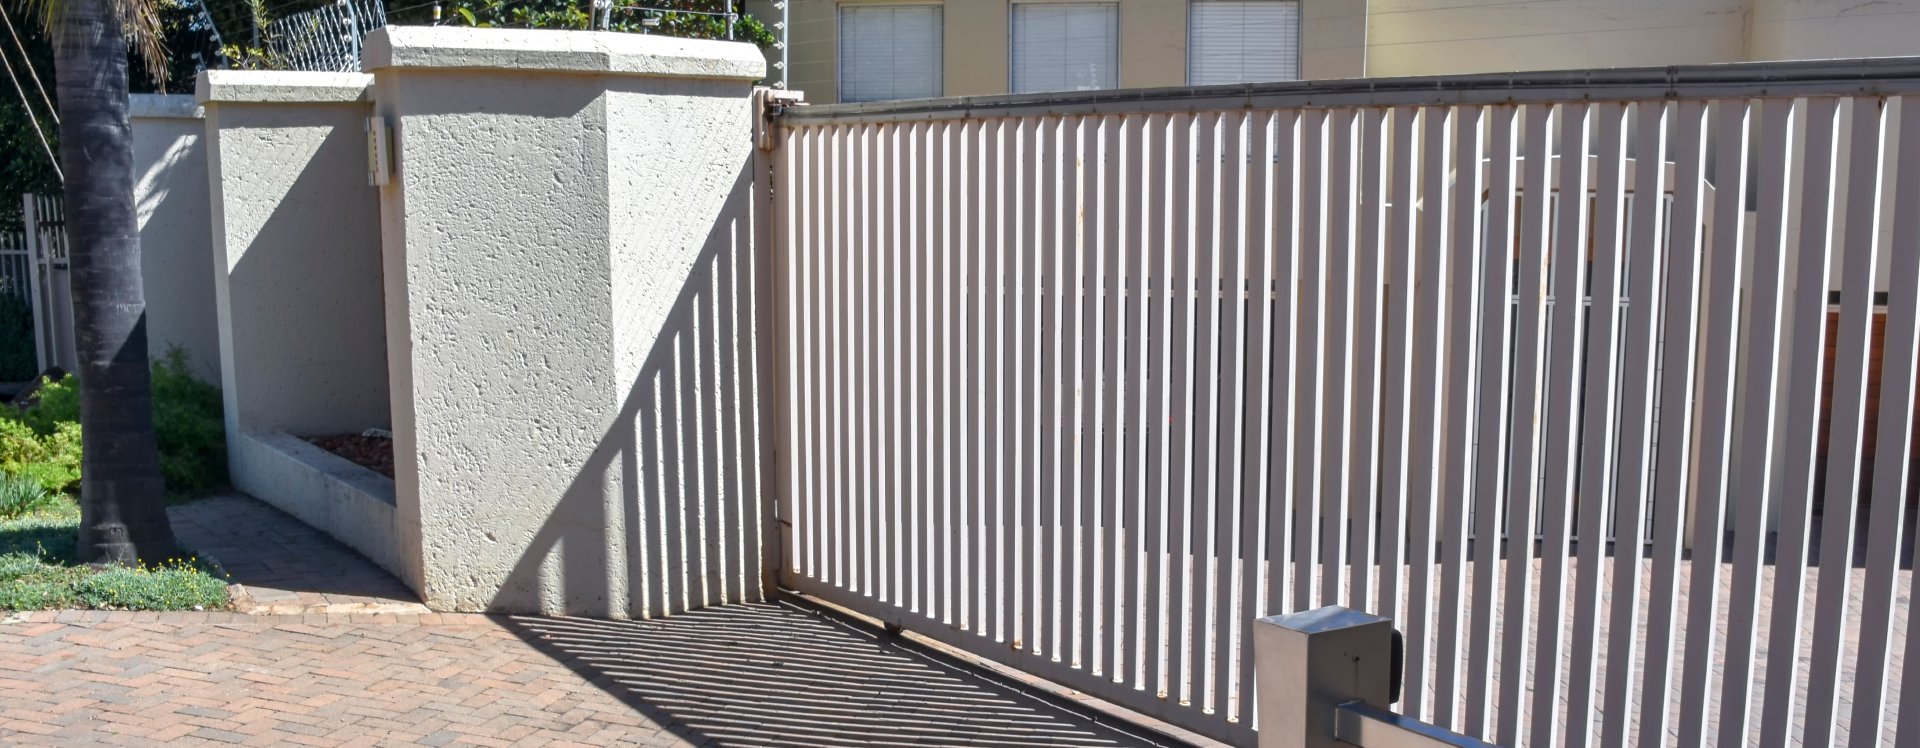 Automatic gates, bollards and Barrier Installers Mid Glamorgan